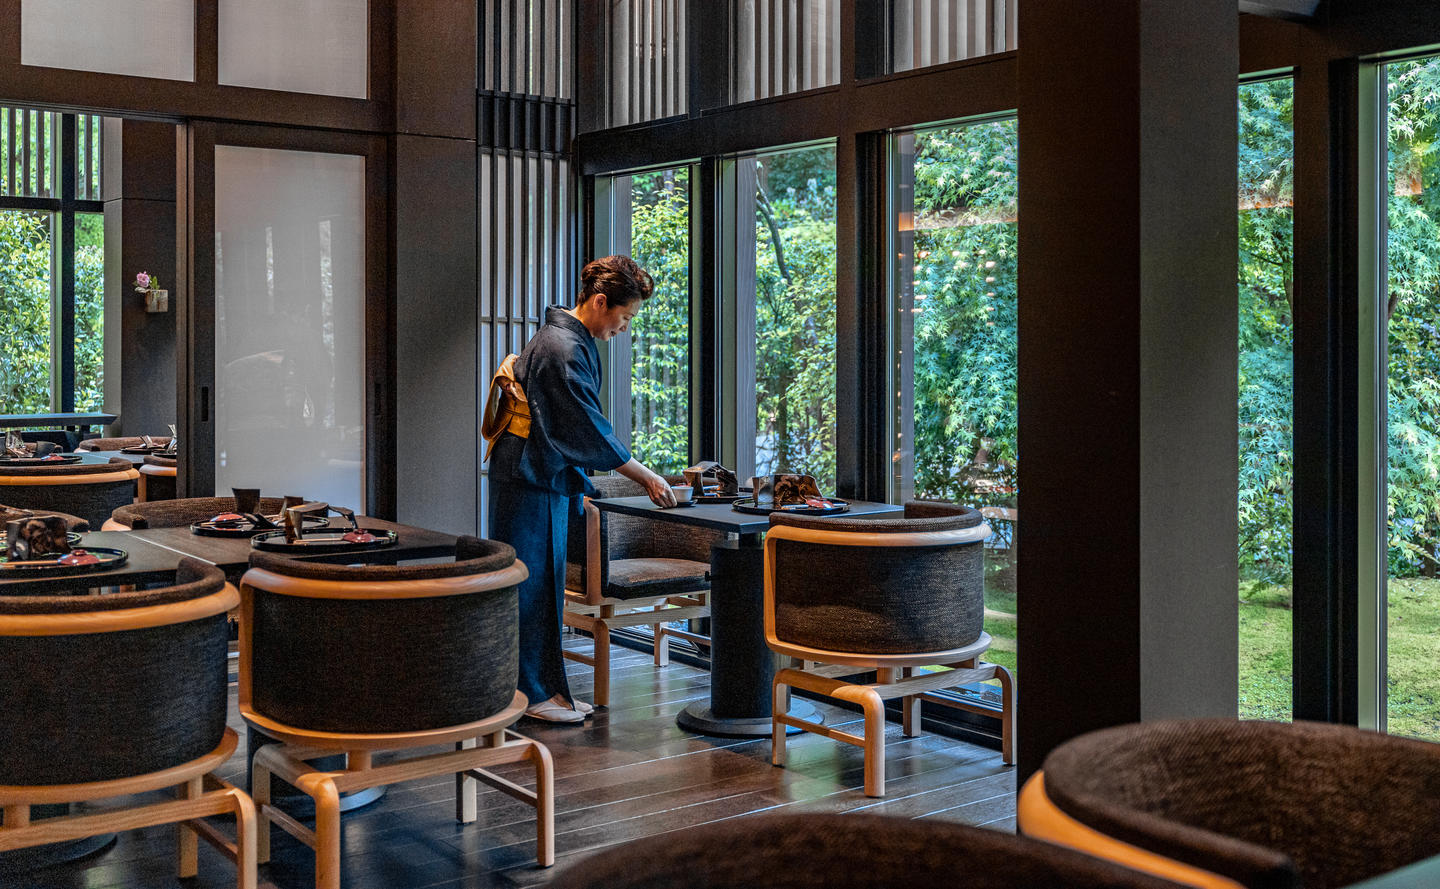 Aman Kyoto, Japan - Resort, Dining, Taka-an, private dining